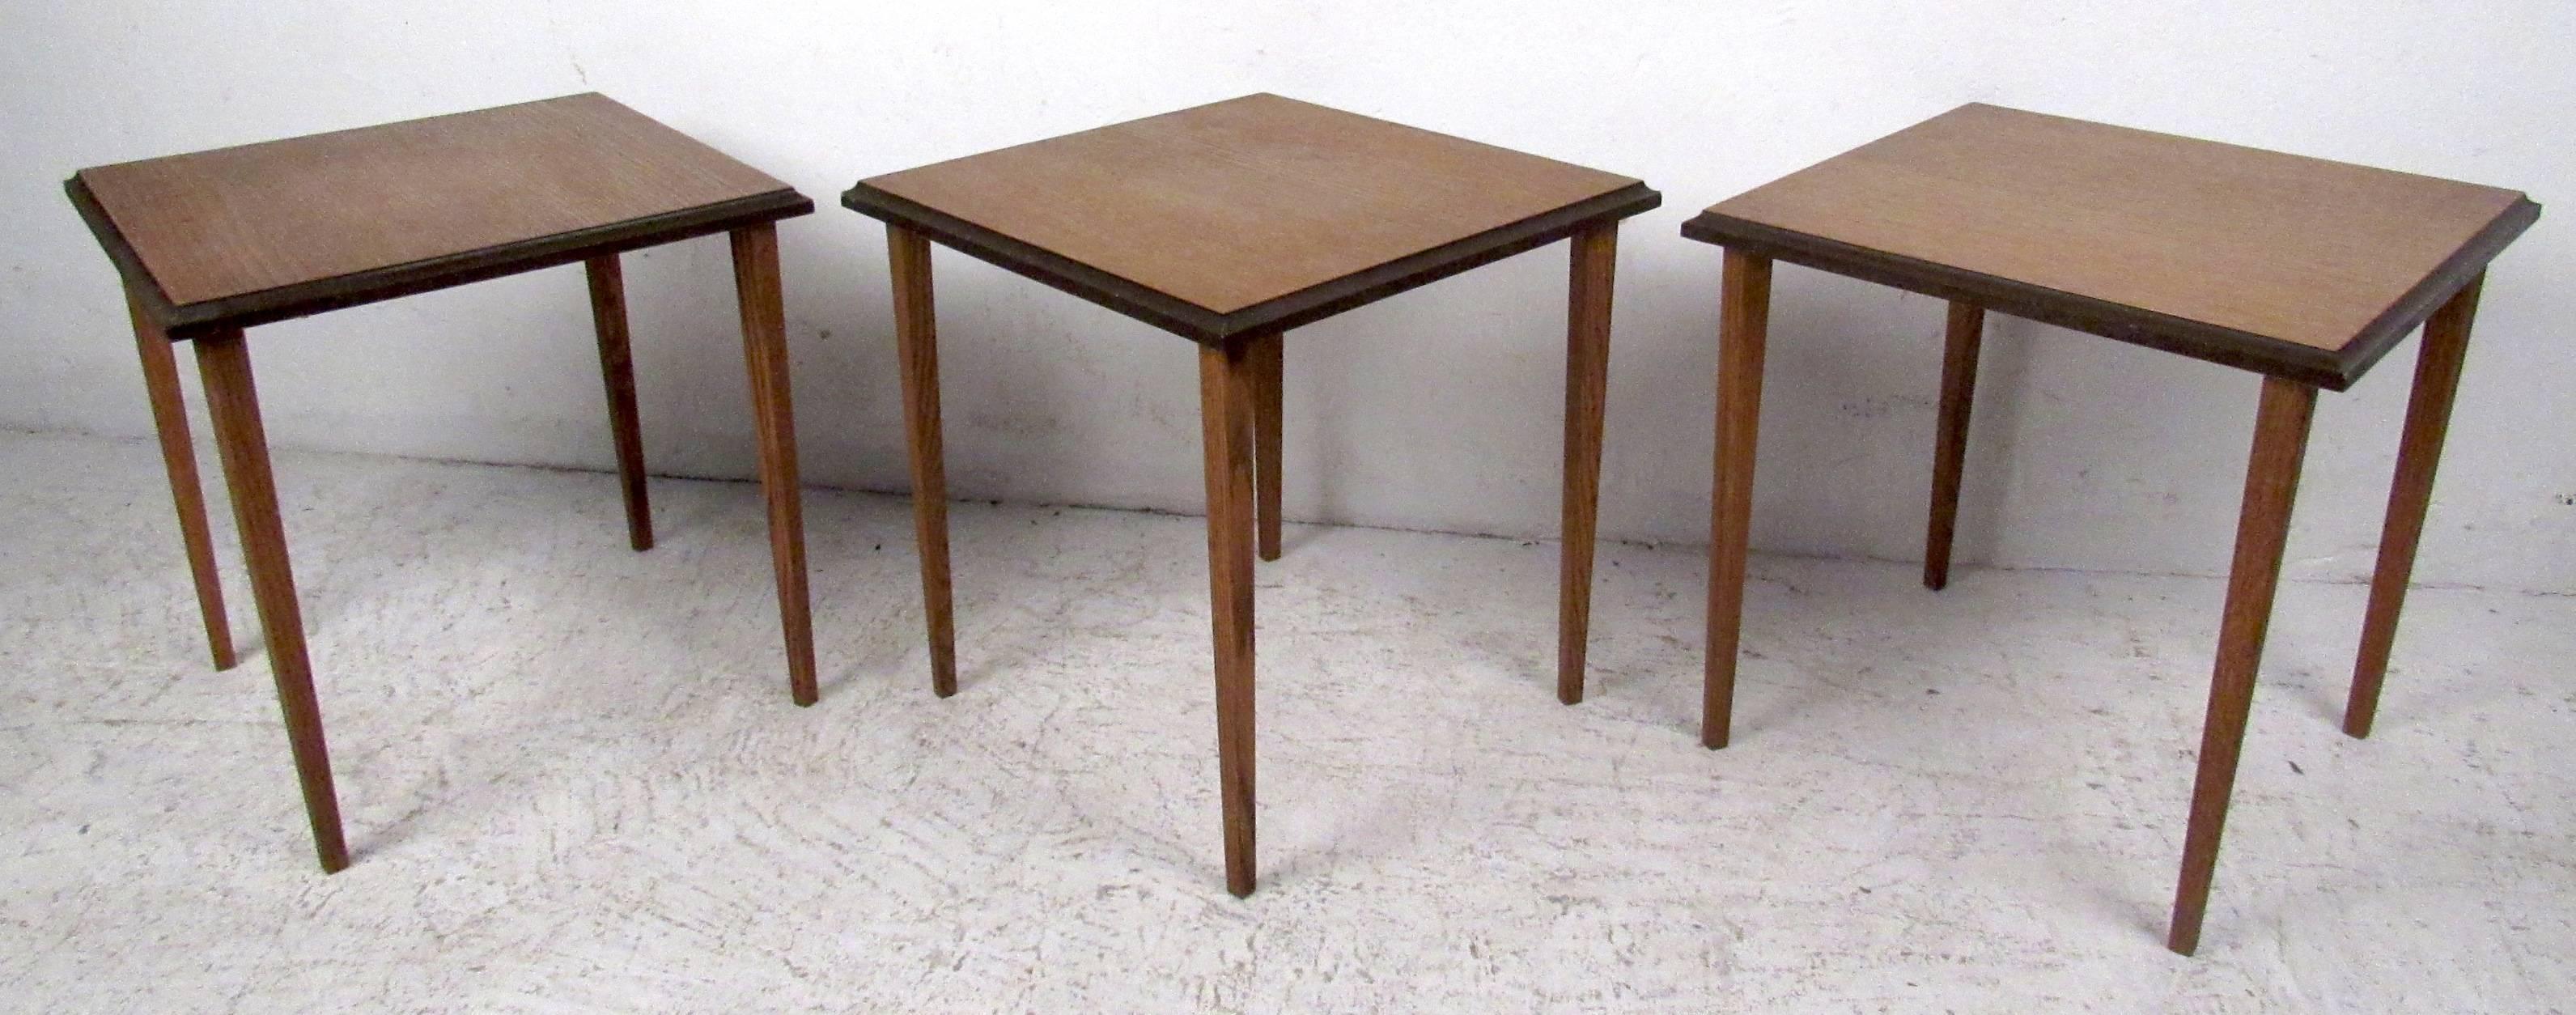 Sleek Mid-Century Nesting Tables In Good Condition For Sale In Brooklyn, NY